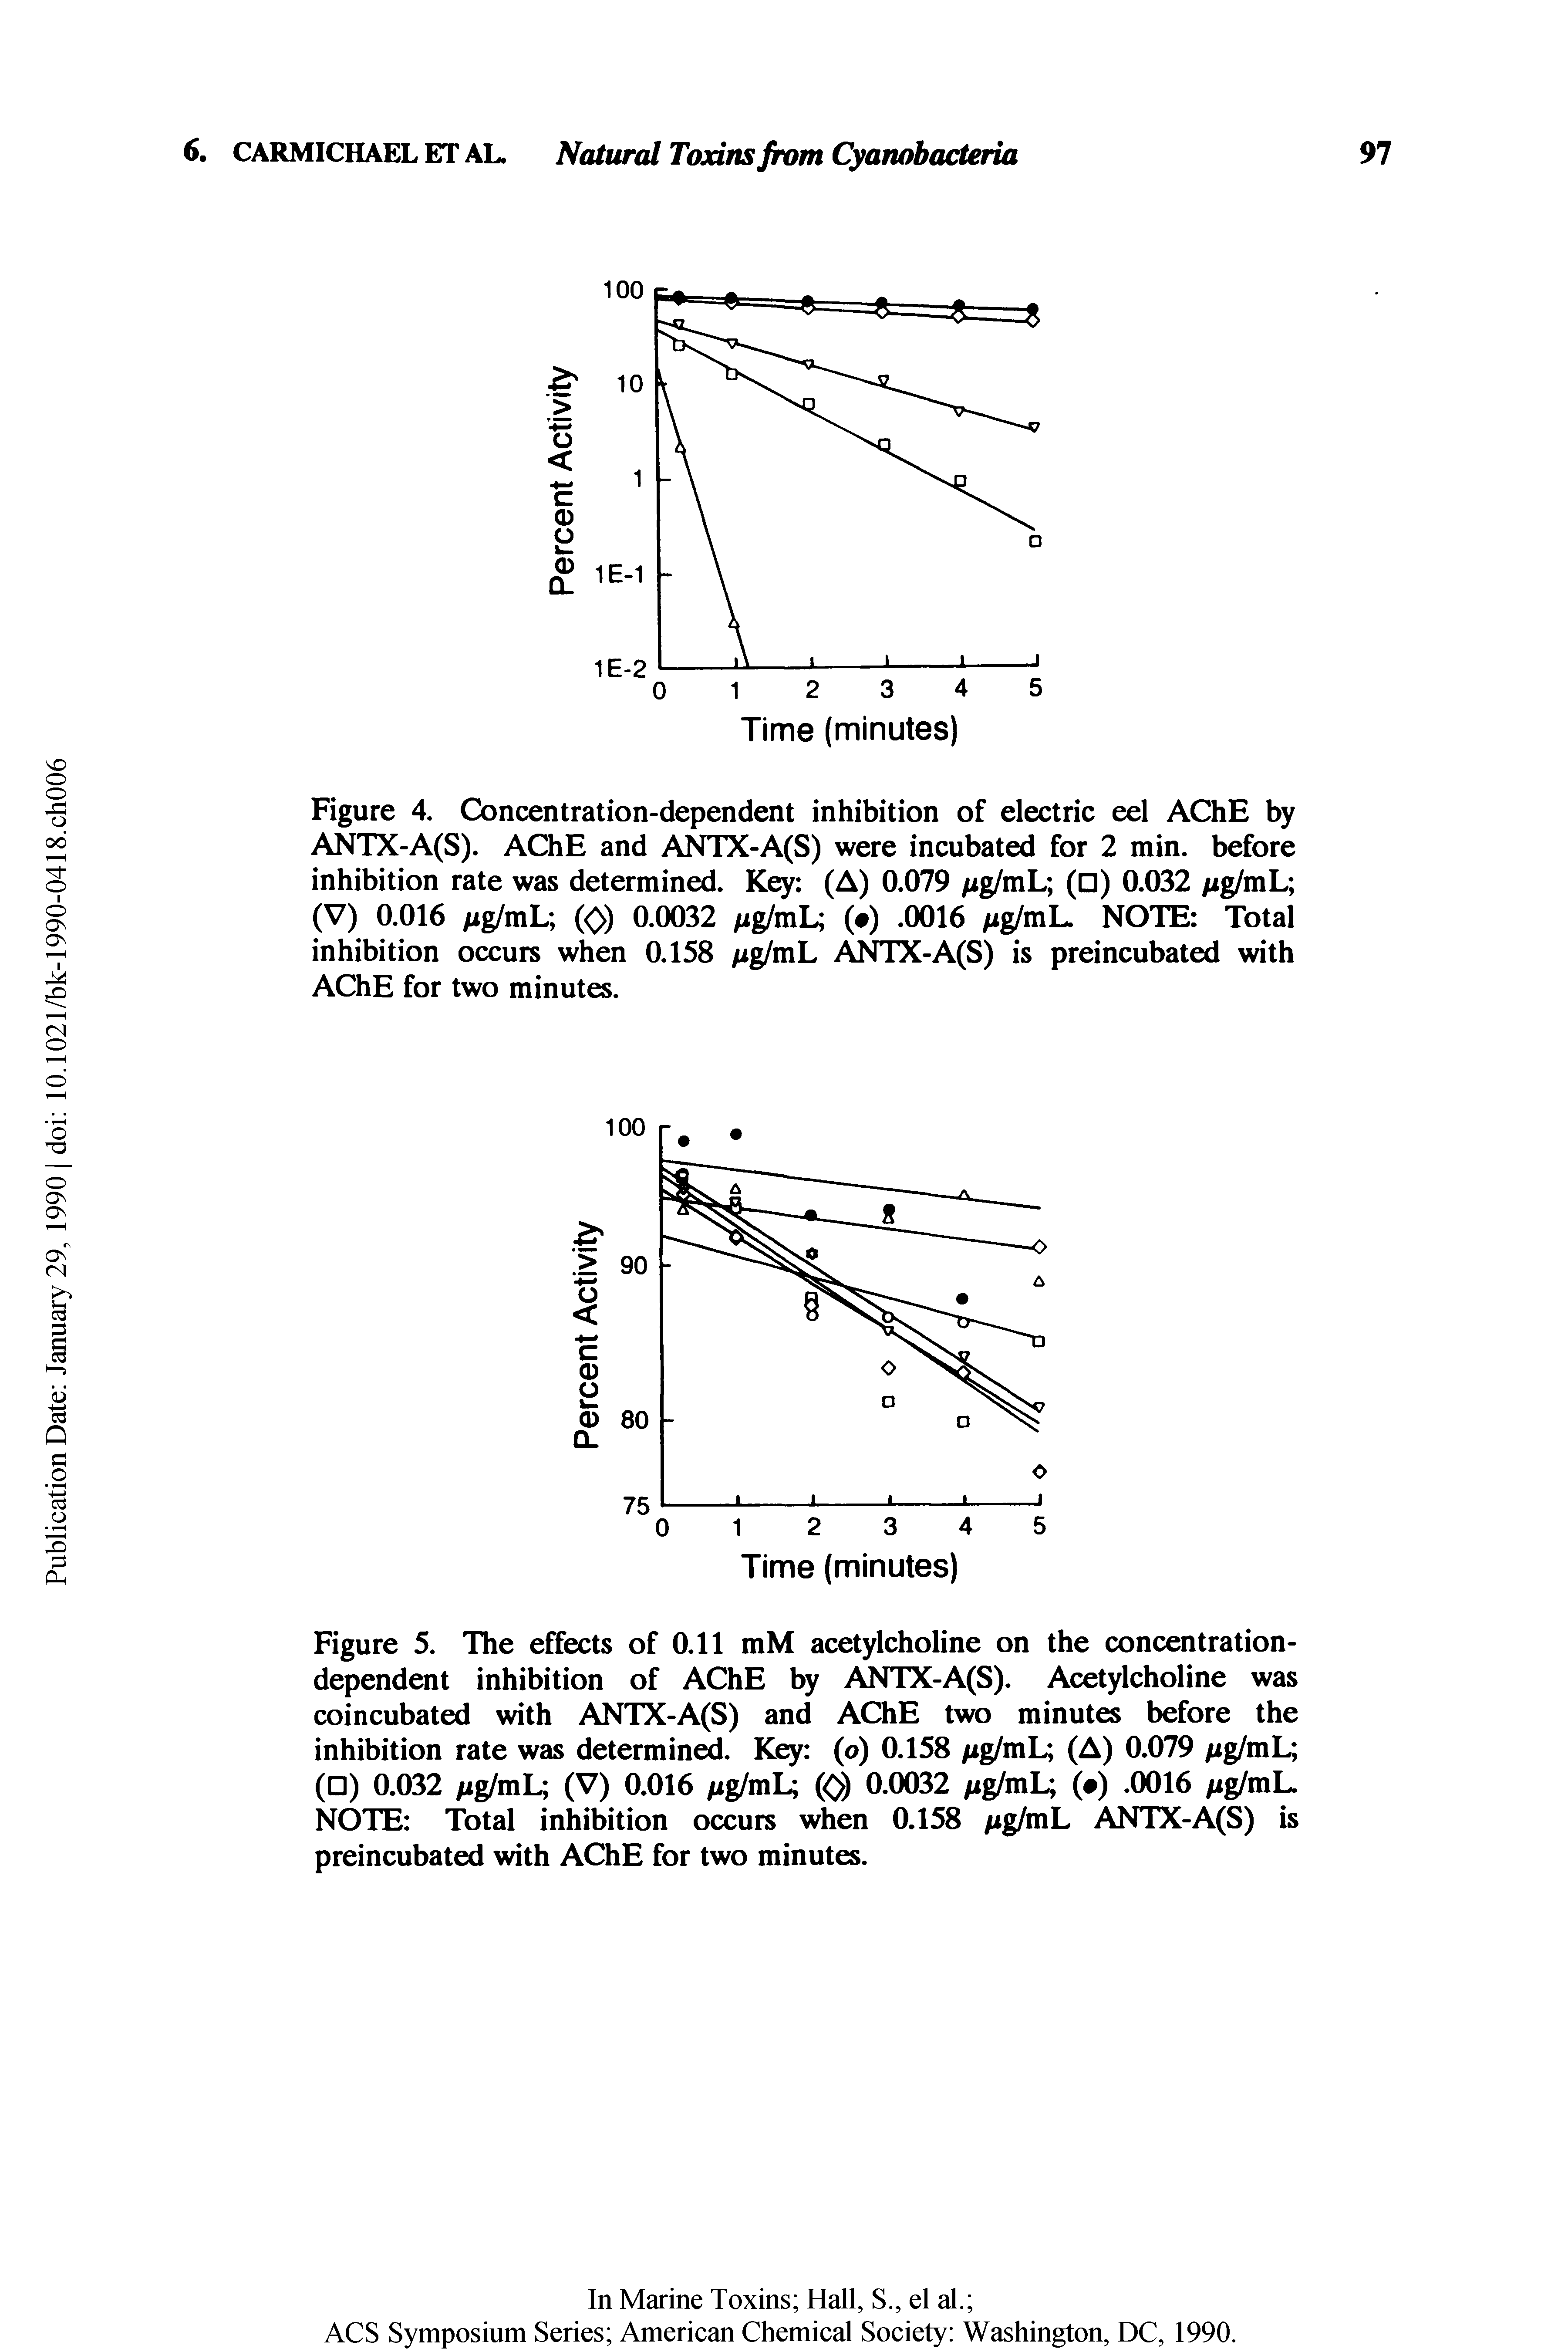 Figure 5. The effects of 0.11 mM acetylcholine on the concentration-dependent inhibition of AChE by ANTX-A(S). Acetylcholine was coincubated with ANTX-A(S) and AChE two minutes before the inhibition rate was determin. Key (o) 0.158 ig/mL (A) 0.079 g/mL ( ) 0.032 Axg/mL (V) 0.016 ng/mU >) 0.0032 ixg/mL ( ). 0016 fig/mL. NOTE Total inhibition occurs when 0.158 fig/mh ANTX-A(S) is preincubated with AChE for two minutes.